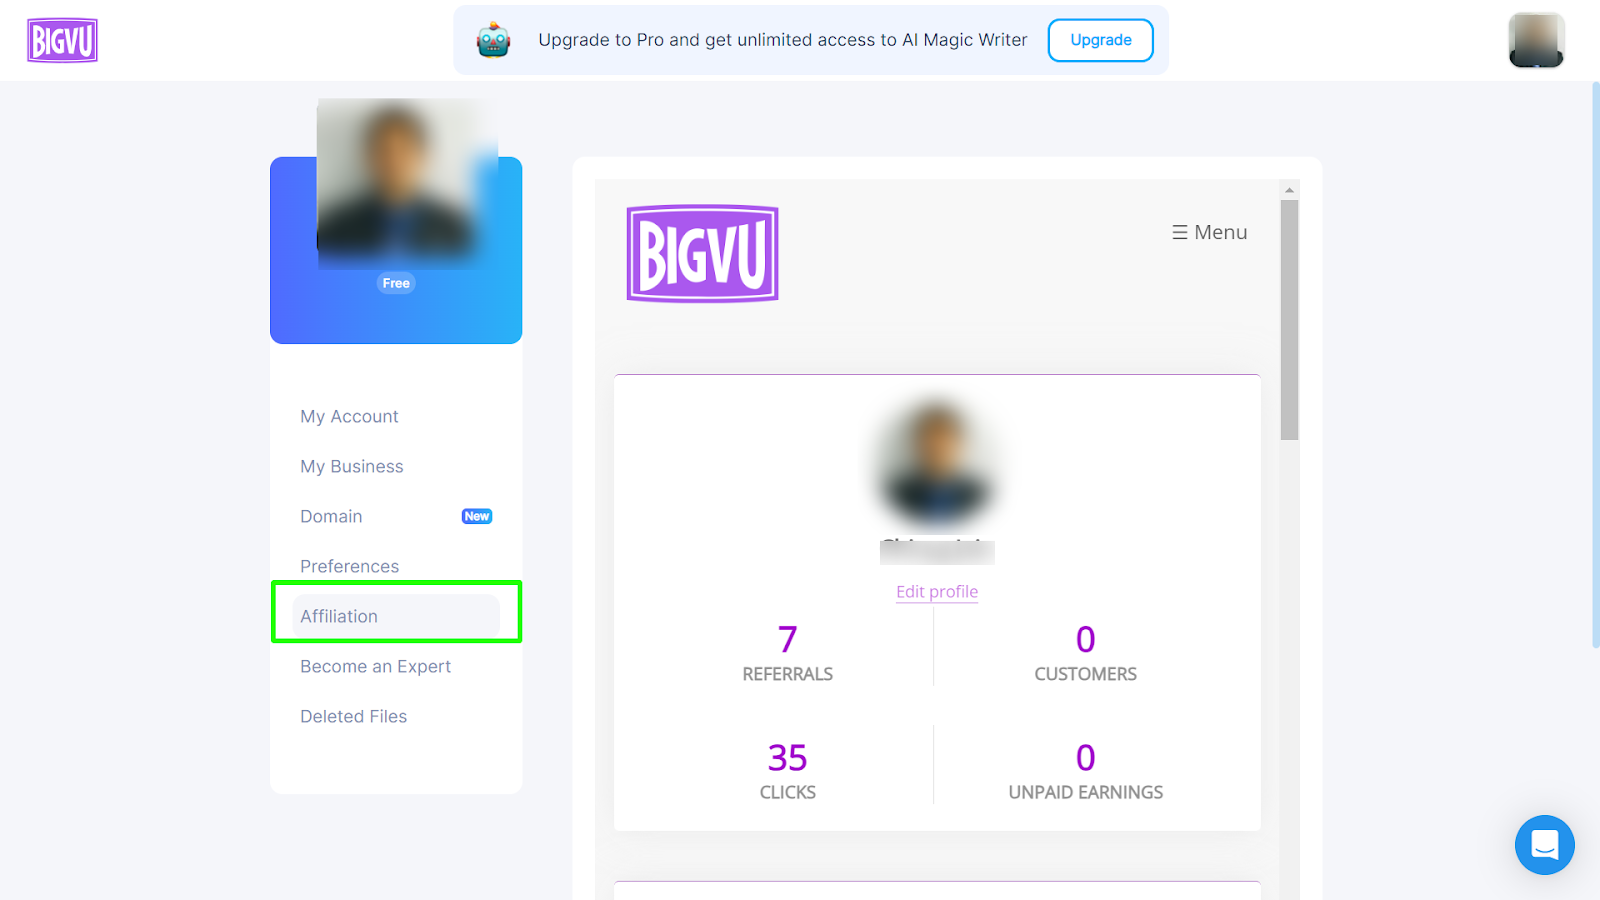 BigVu, a teleprompter tool, turns every new user into an affiliate automatically.